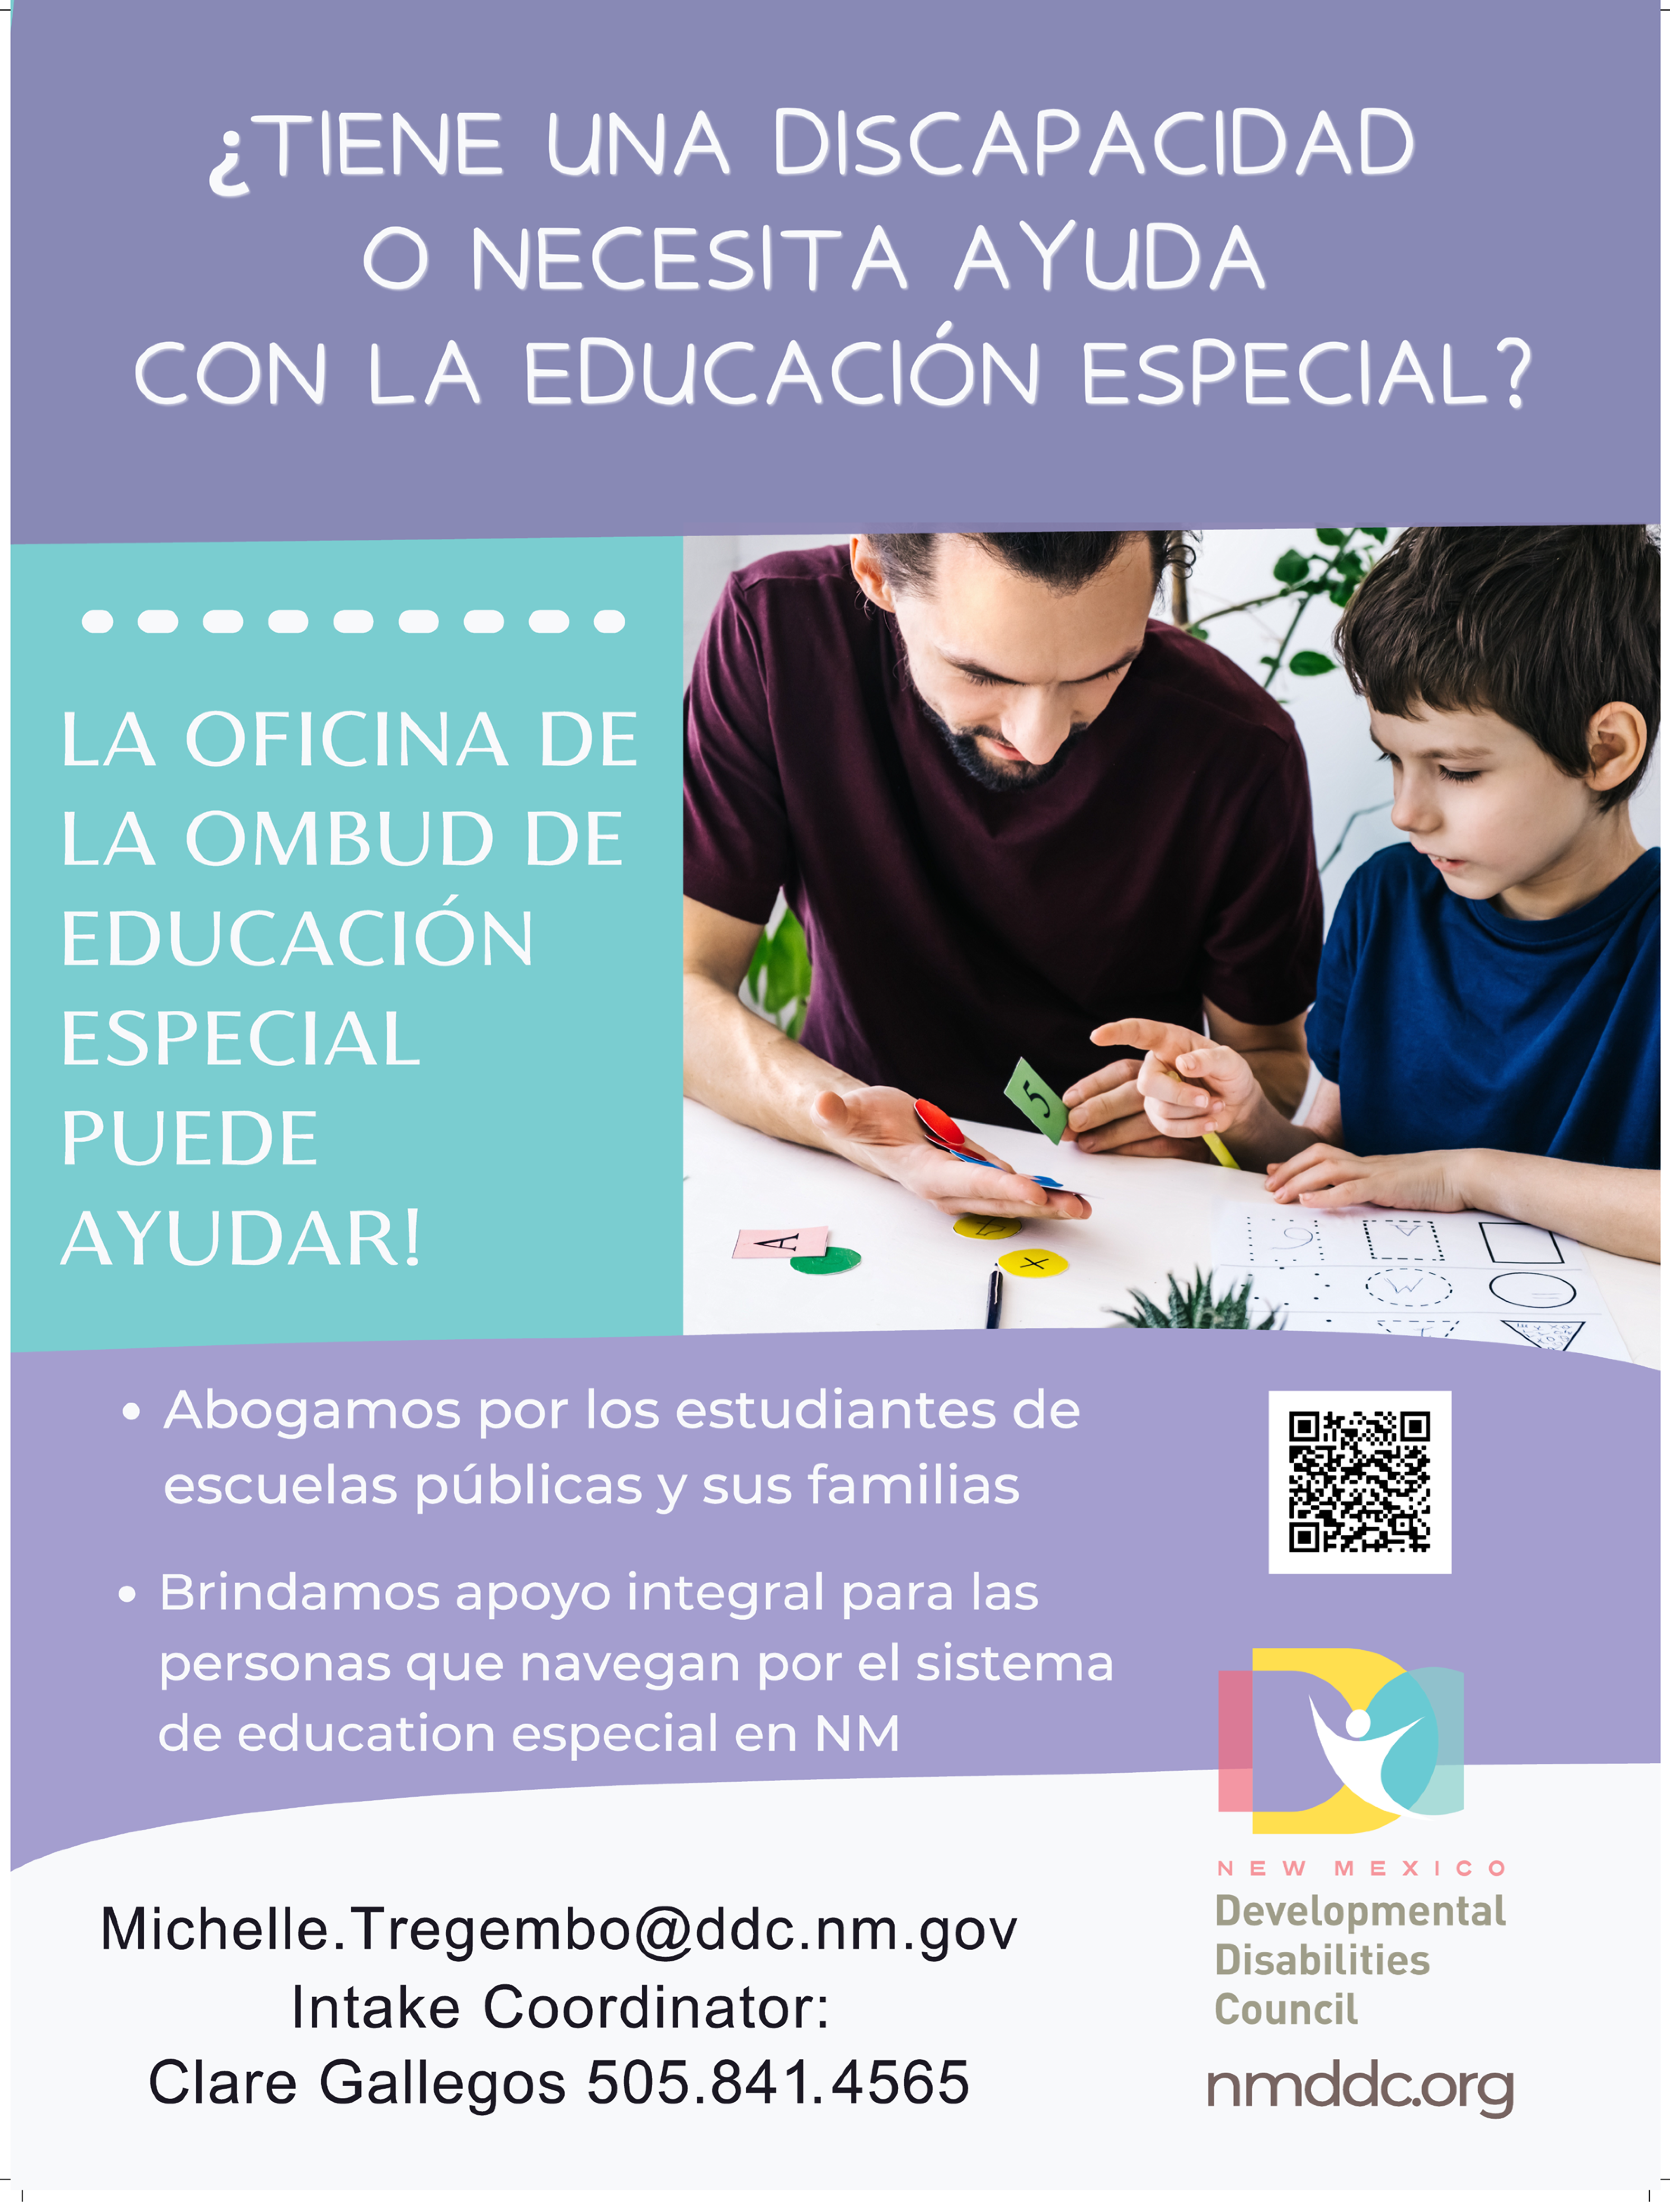 Office of the Special Education Ombud - in Spanish